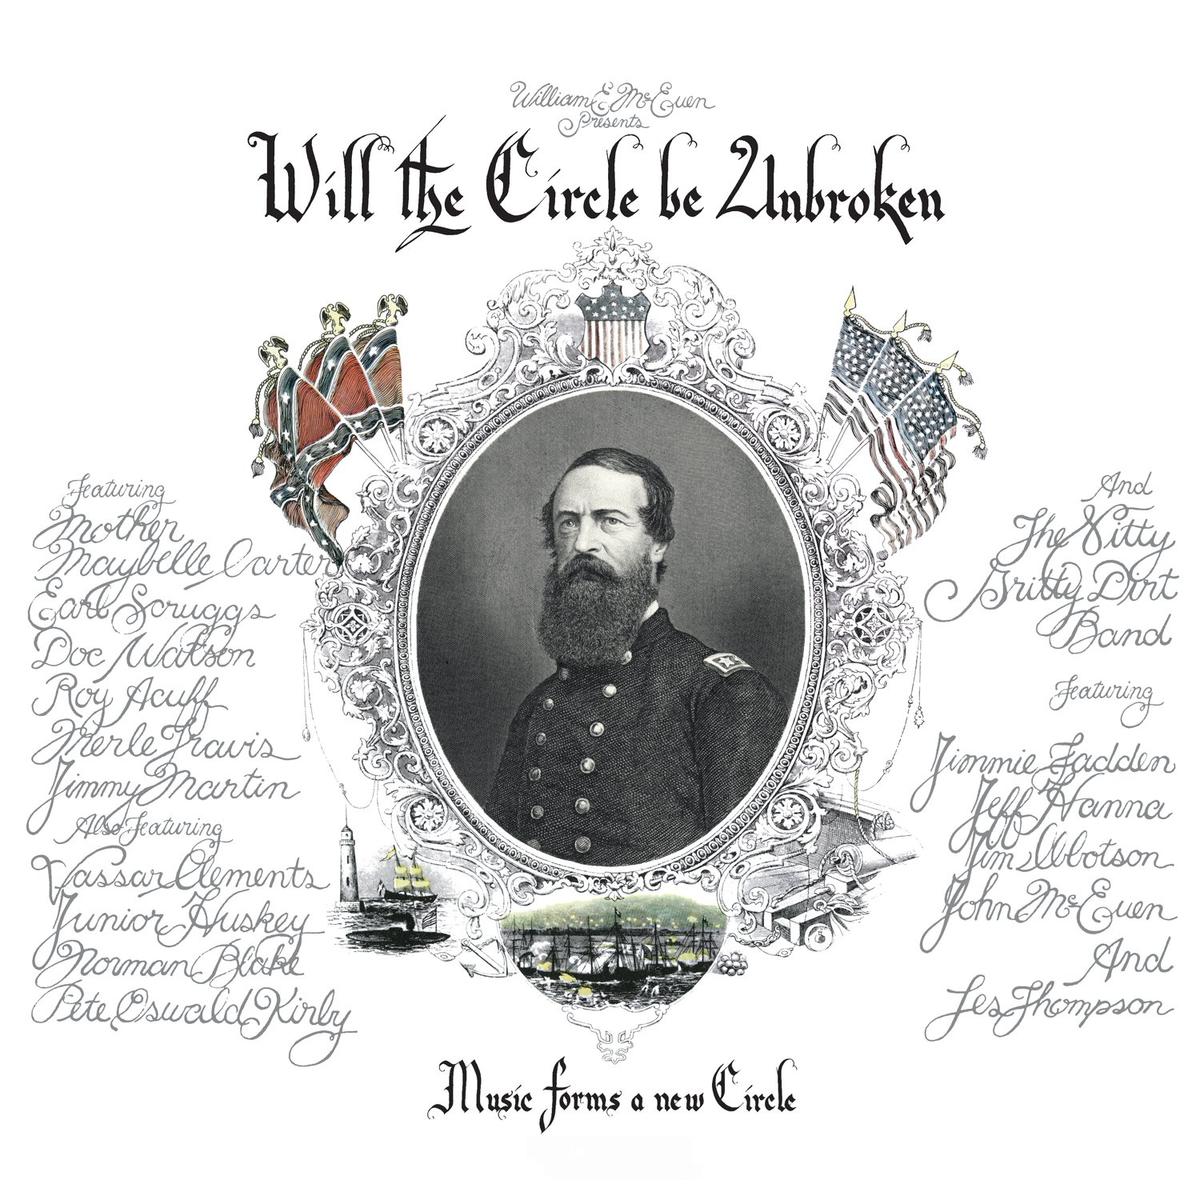 Cover for the 1972 vinyl "Will The Circle Be Unbroken" by the Nitty Gritty Band.